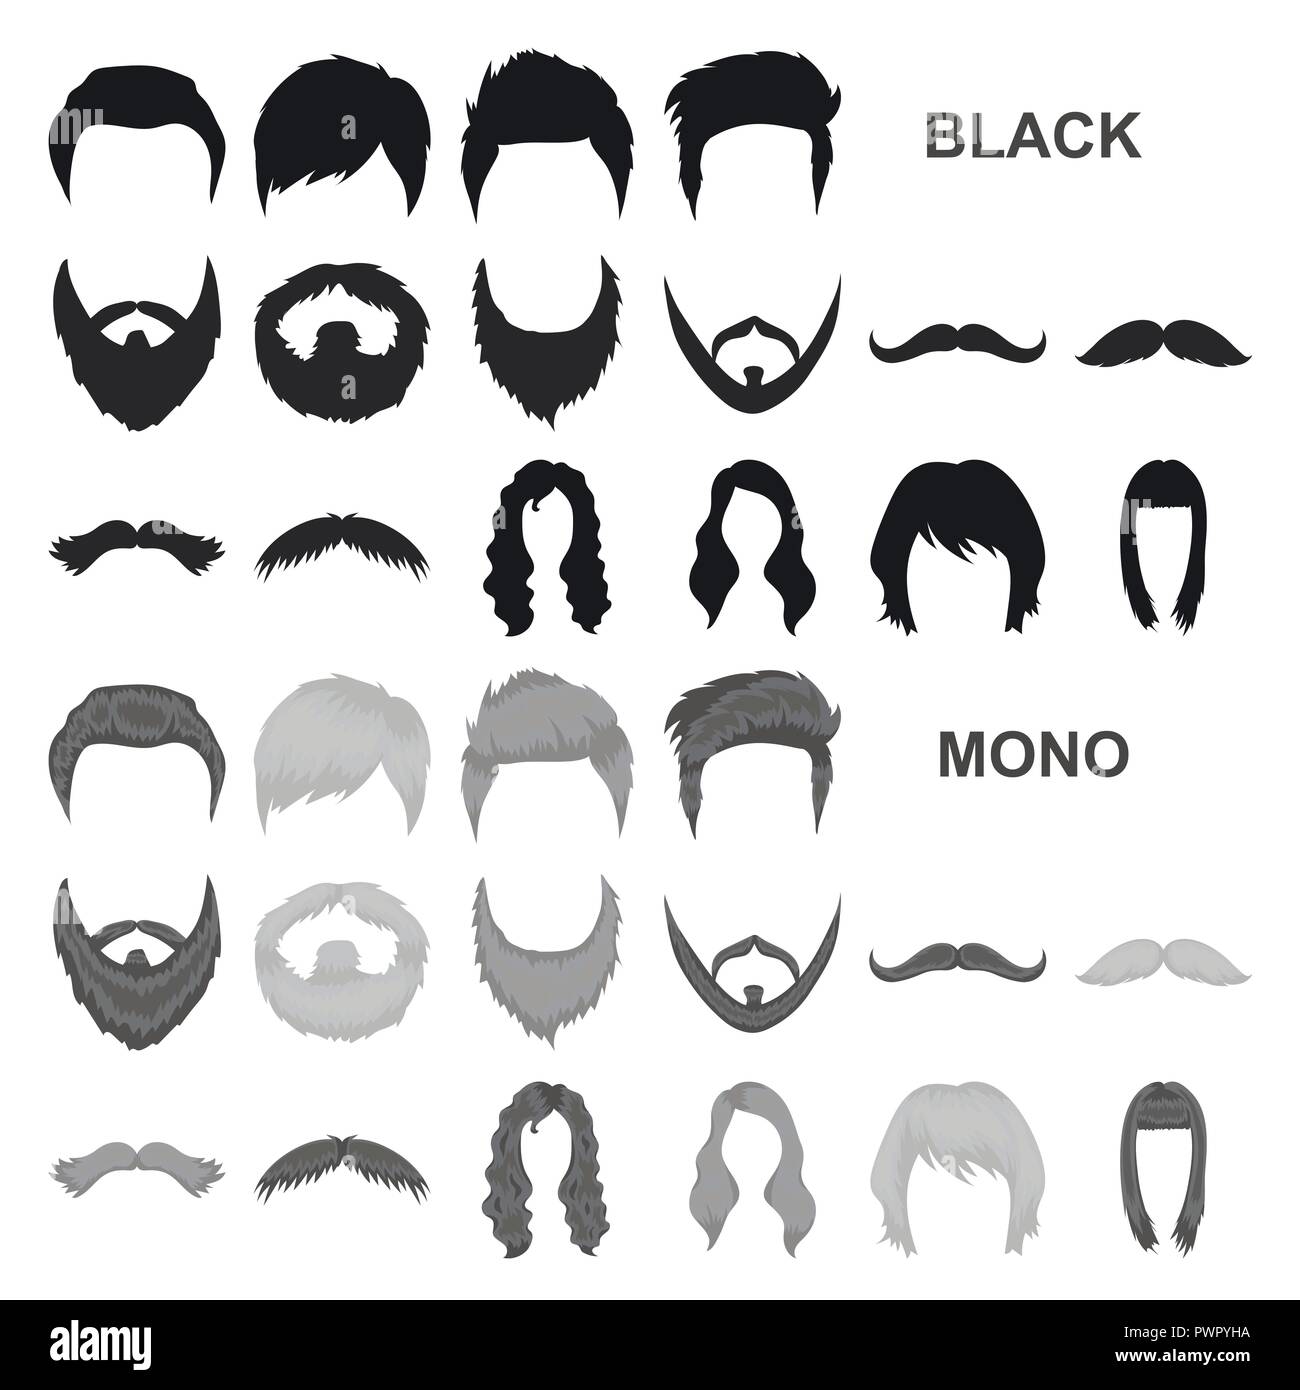 art,beard,black ,blond,blonde,brown,care,collection,curl,design,fashion,female,hair,haircut ,hairdresser,hairstyle,icon,illustration,image,isolated,logo,man ,model,mustache,red,scythe,set,shave,sign,style,symbol,tail,type,variety,vector,web,woman,  Vector ...